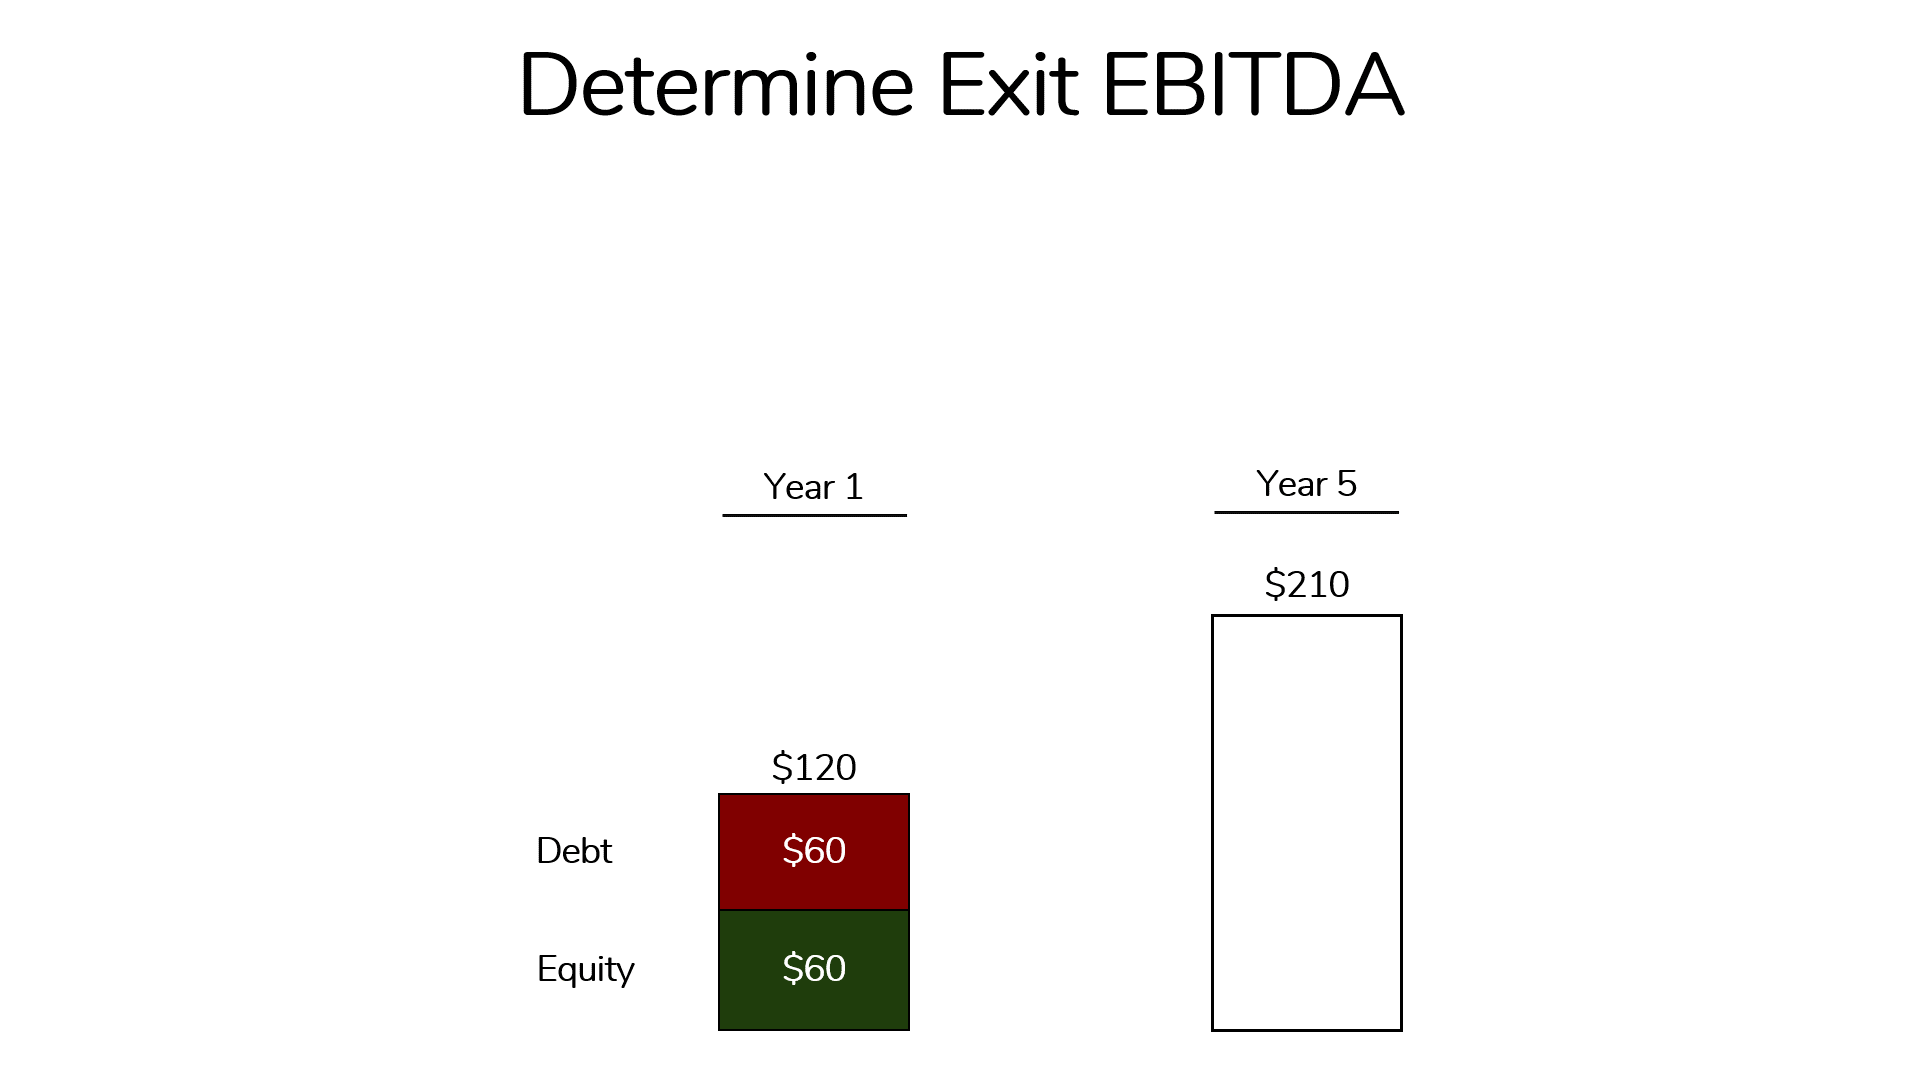 an image showing how to calculate the Required Exit EBITDA for the reverse paper LBO